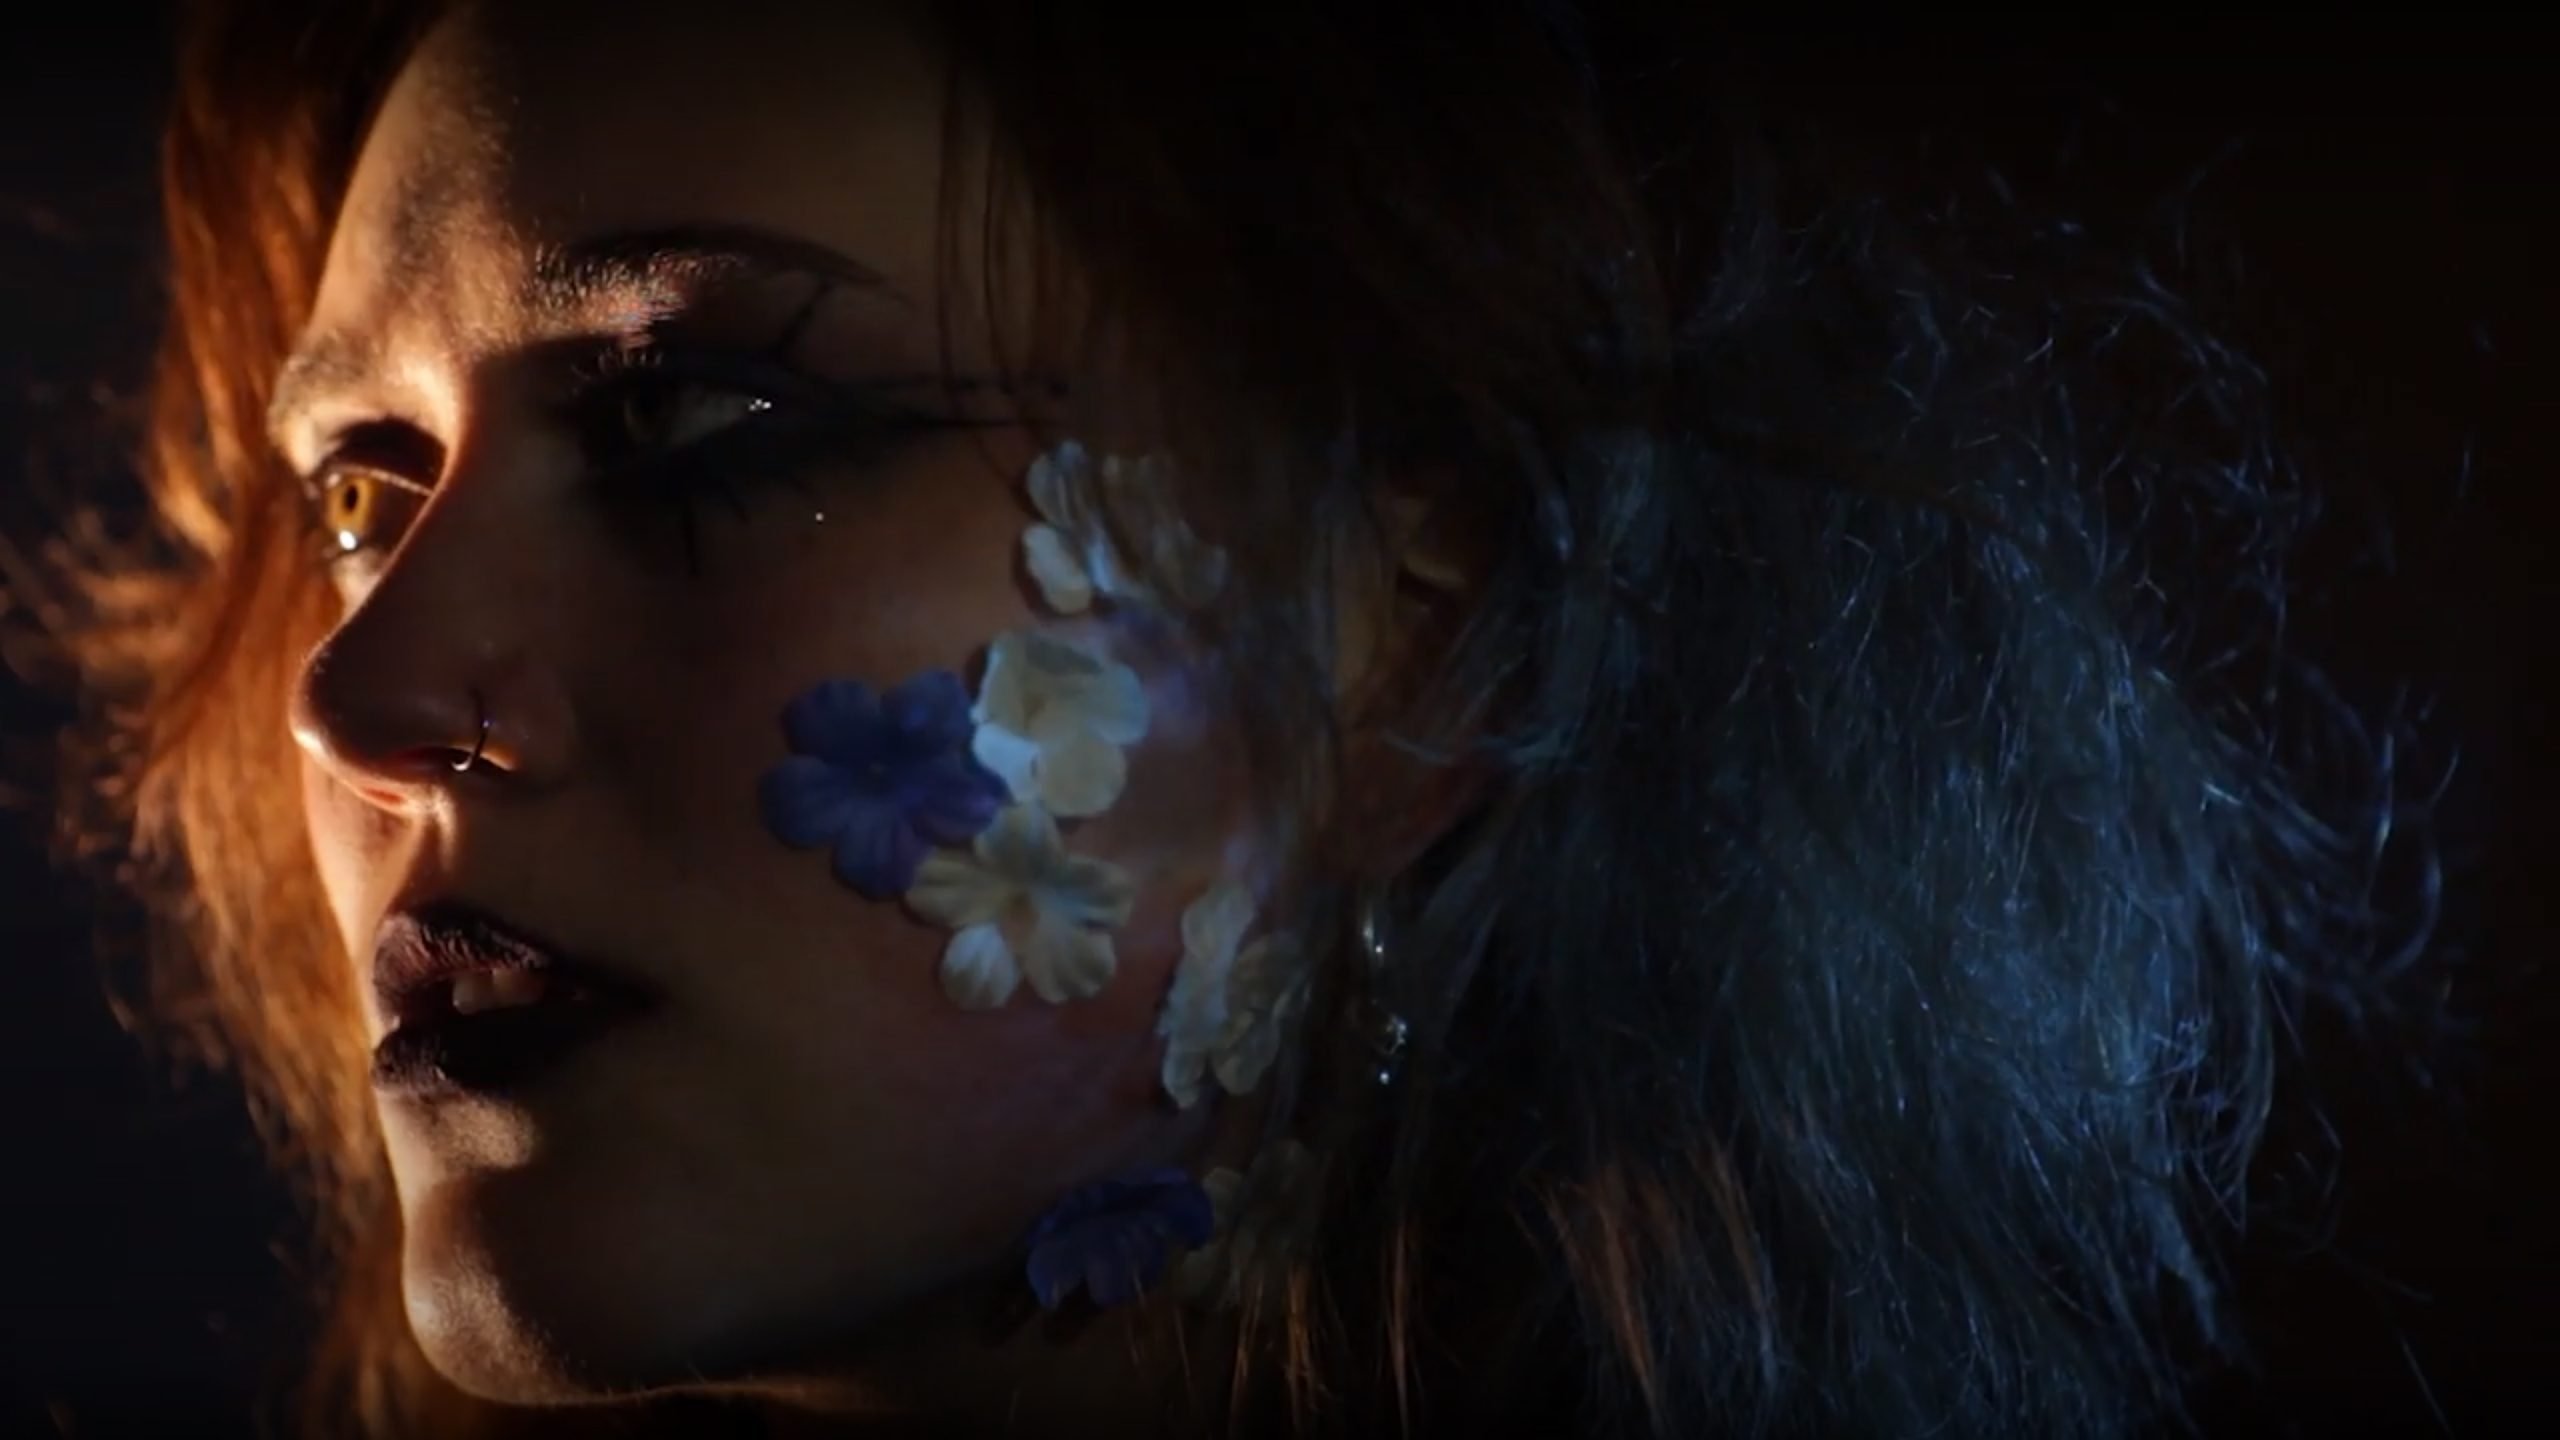 Secret Shame Return With Flowers and Dark Dream Pop in Their Video for  